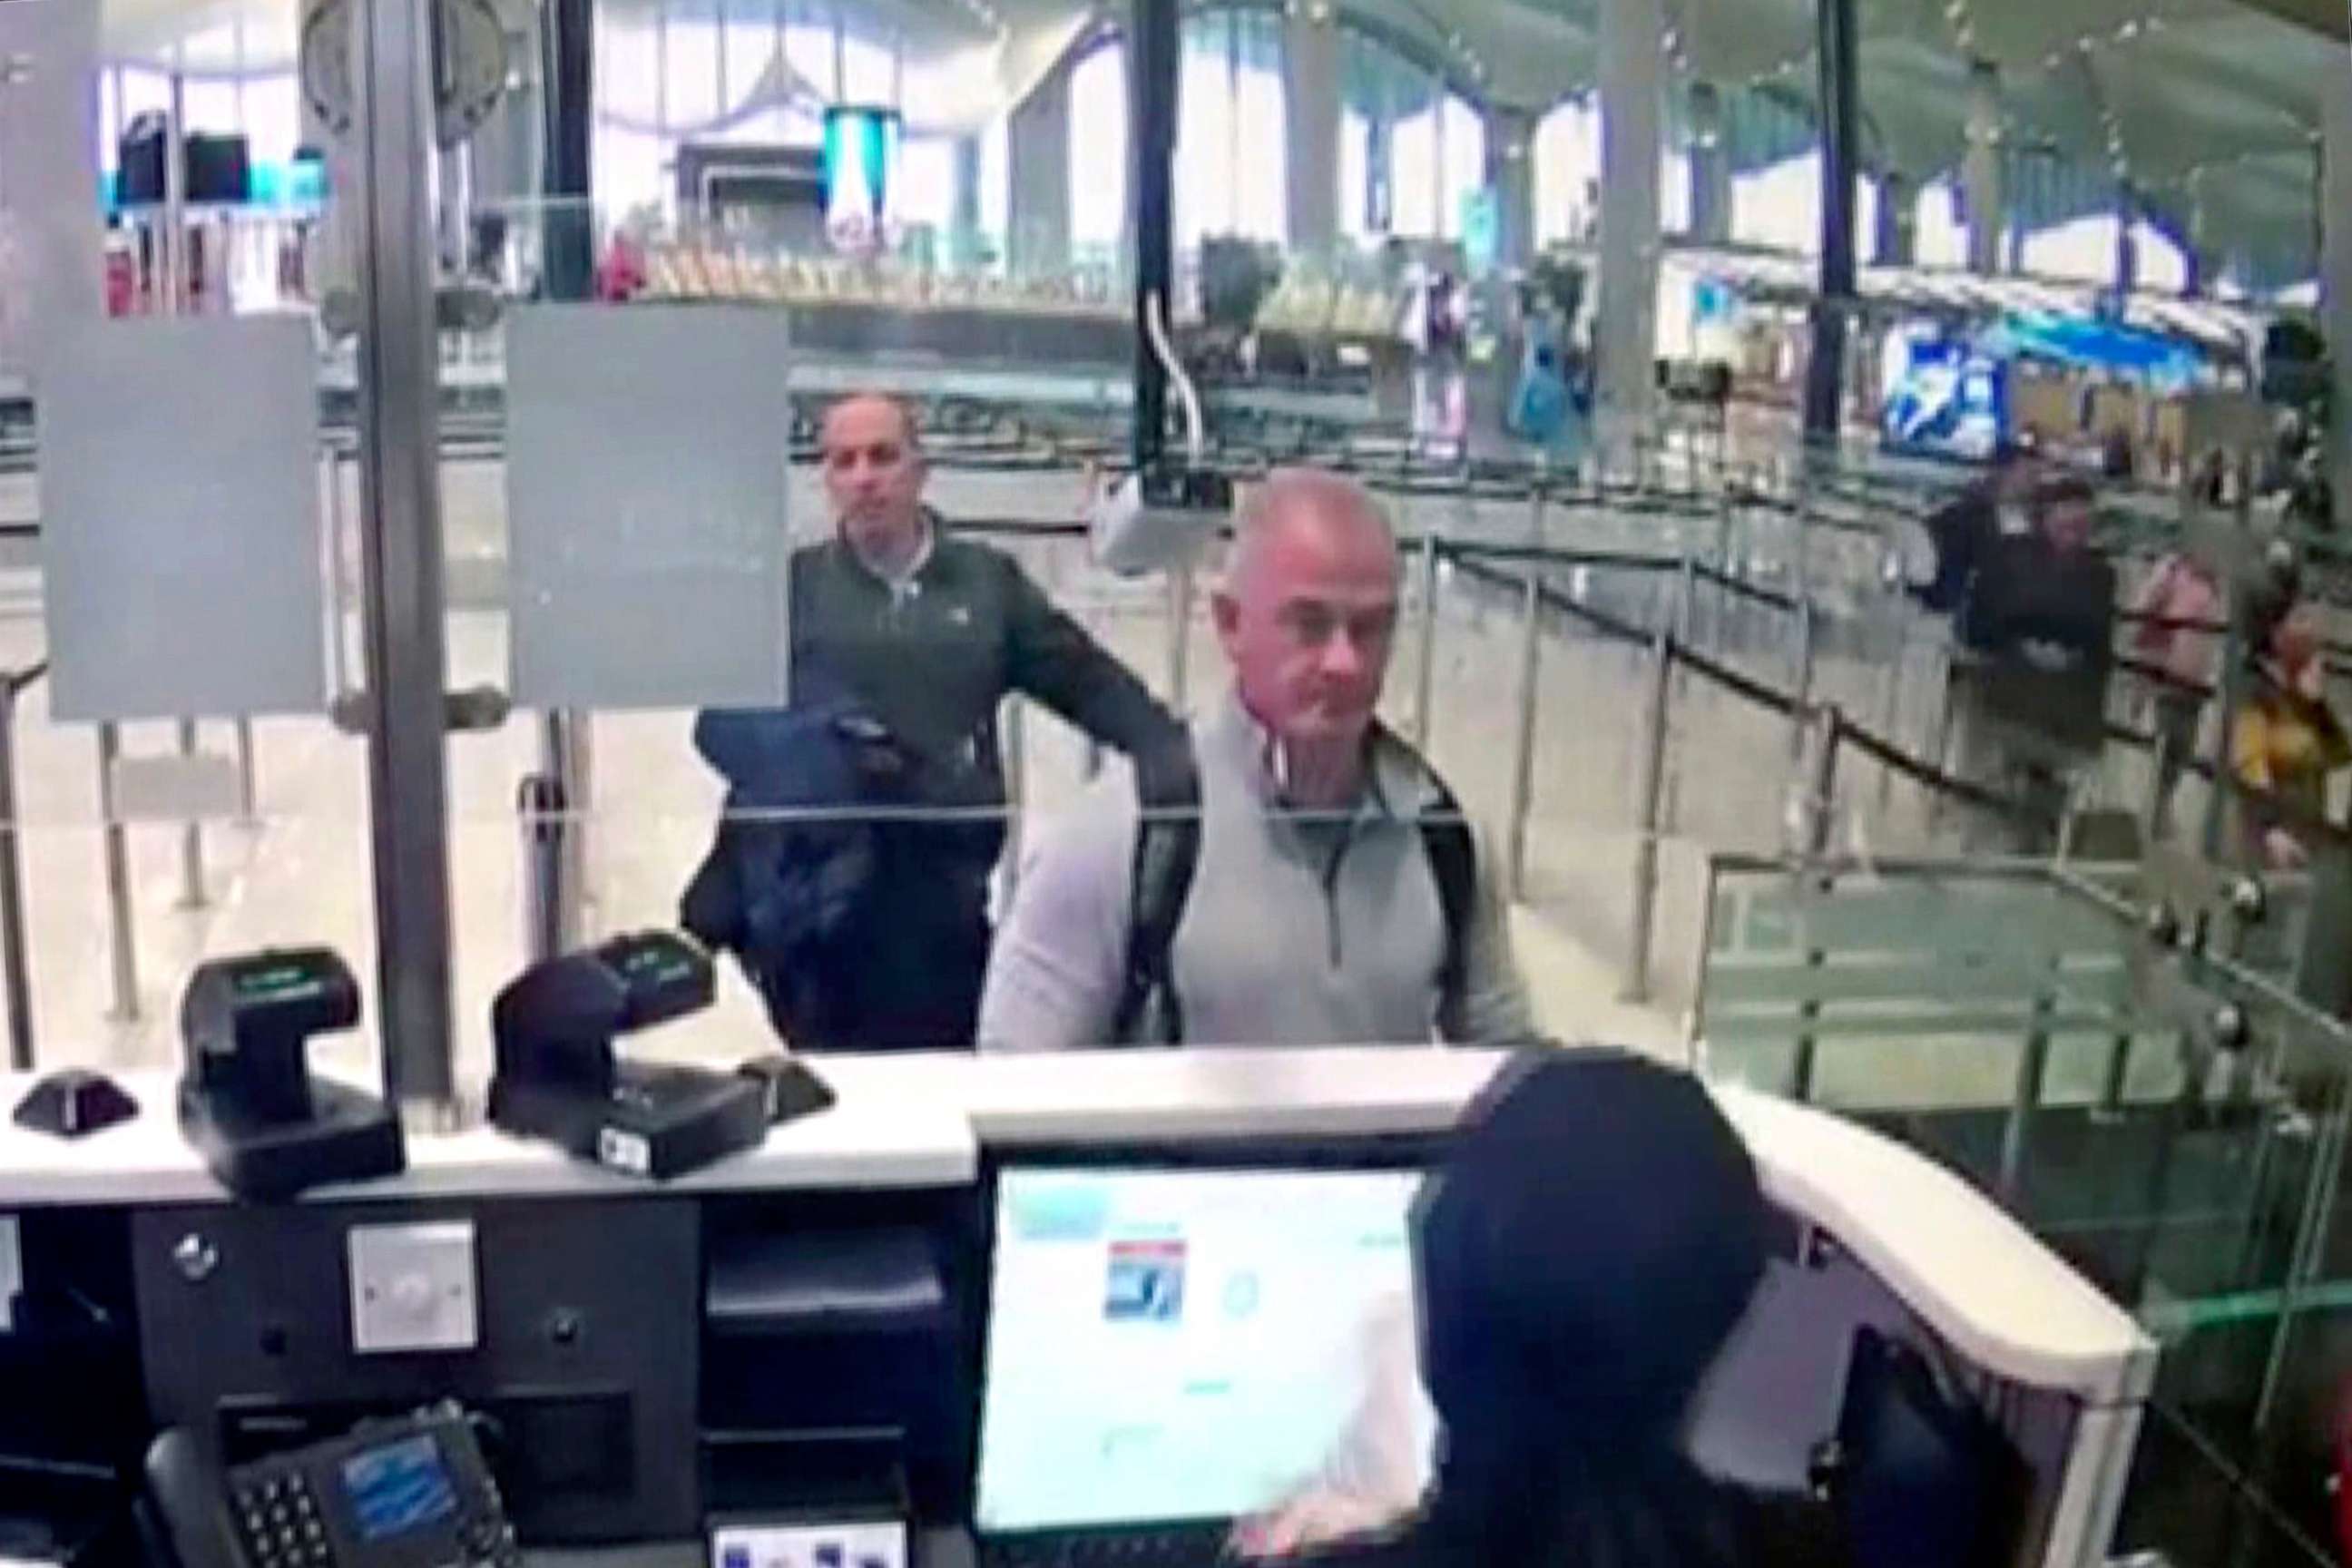 PHOTO: This Dec. 30, 2019, image from security camera video shows Michael L. Taylor, center, and George-Antoine Zayek at passport control at Istanbul Airport in Turkey.